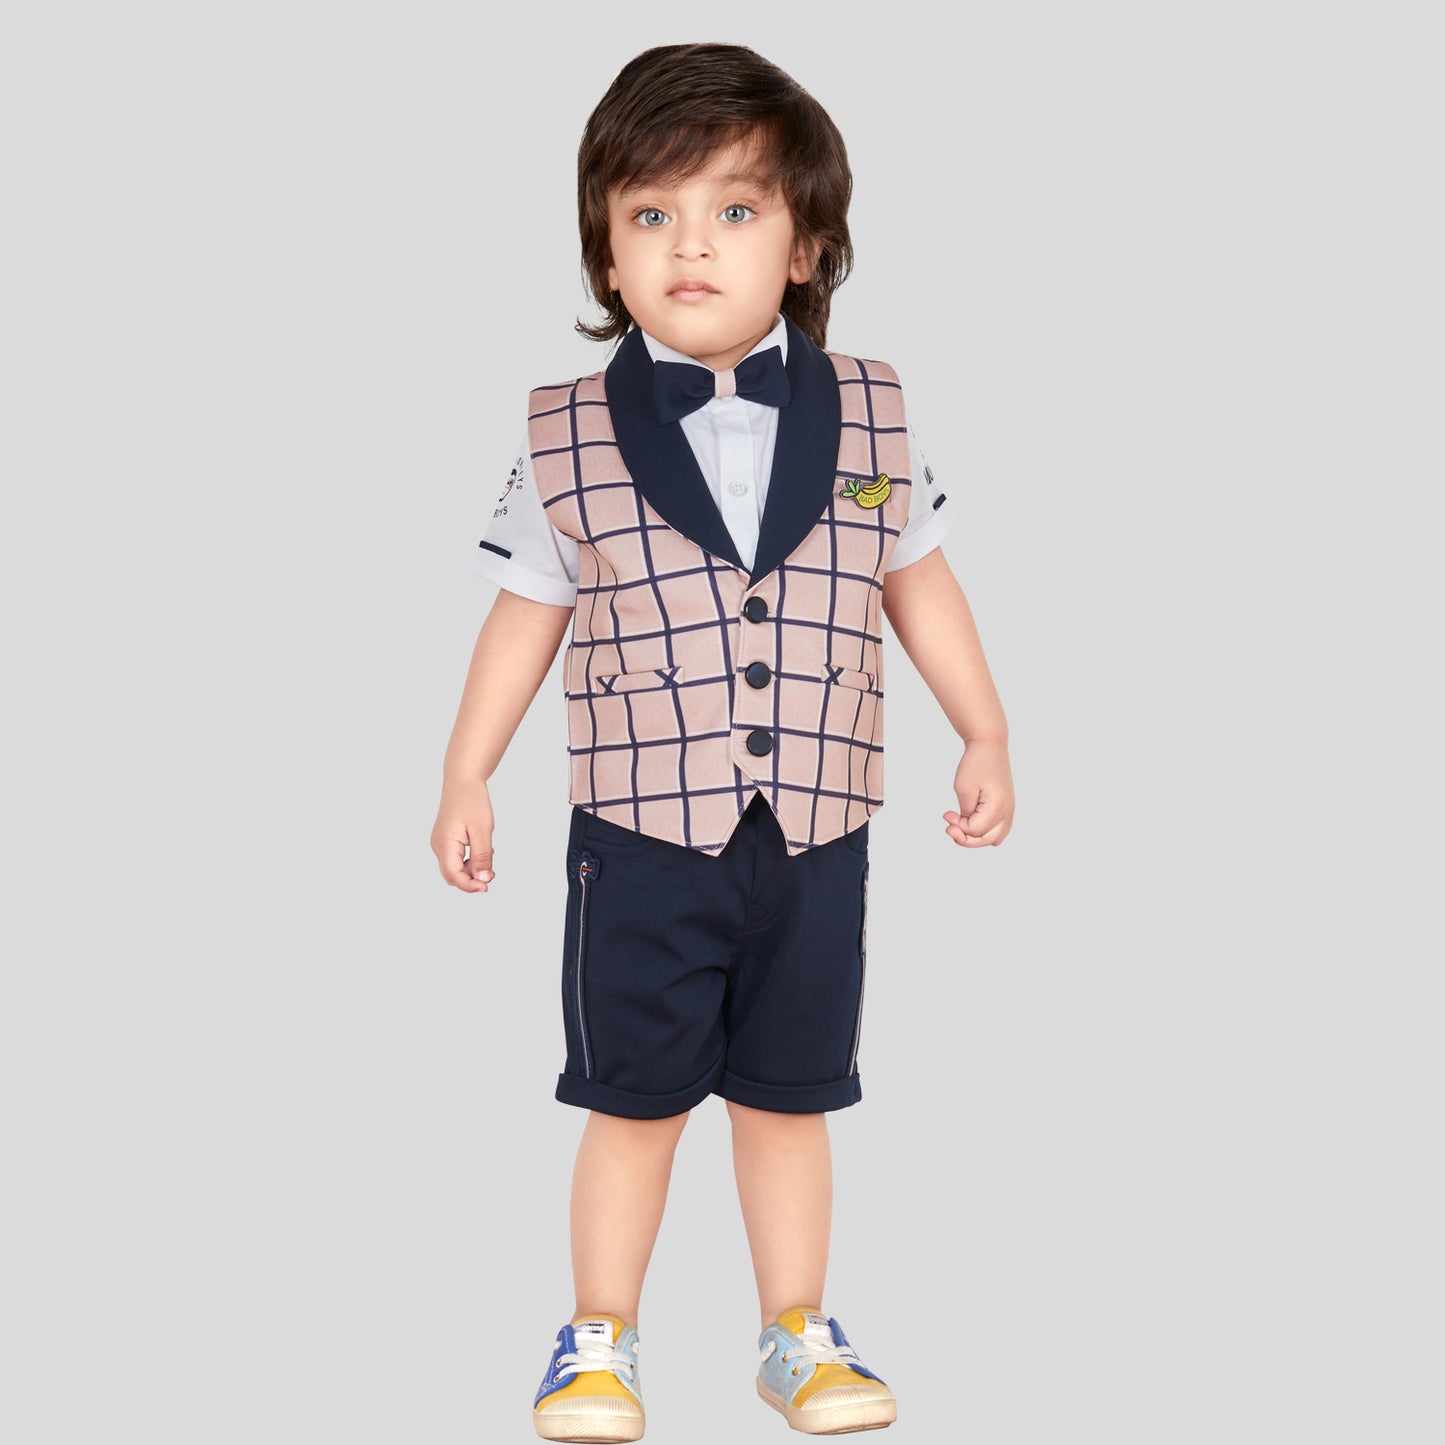 Dapper & Adorable: Checked Waistcoat Set with Bow Tie for Little Gents!